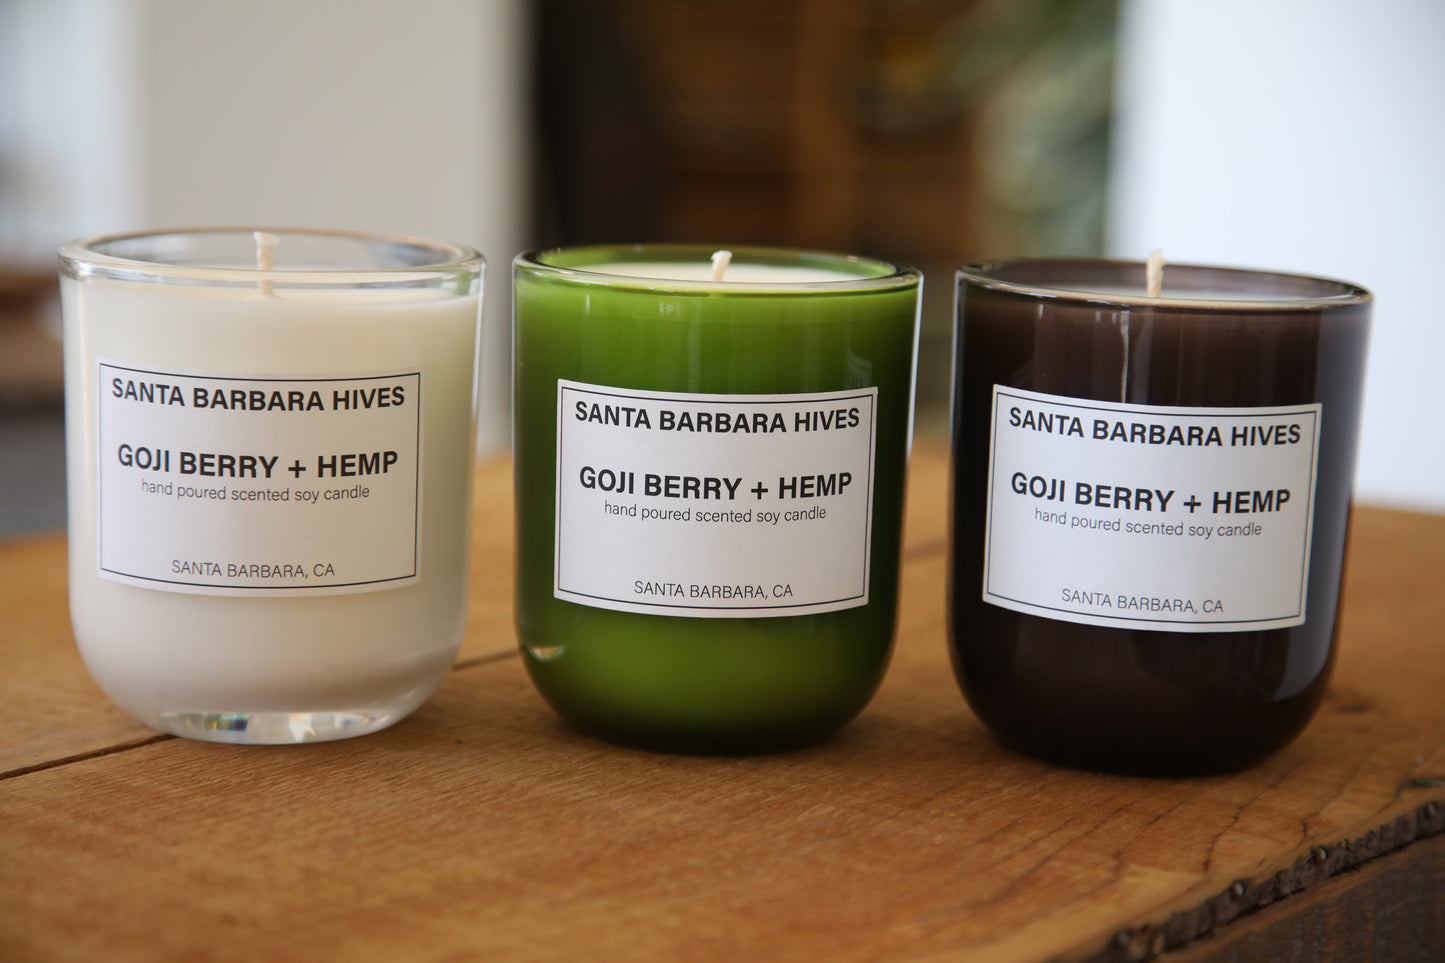 Goji Berry + Hemp Scented Soy Candle